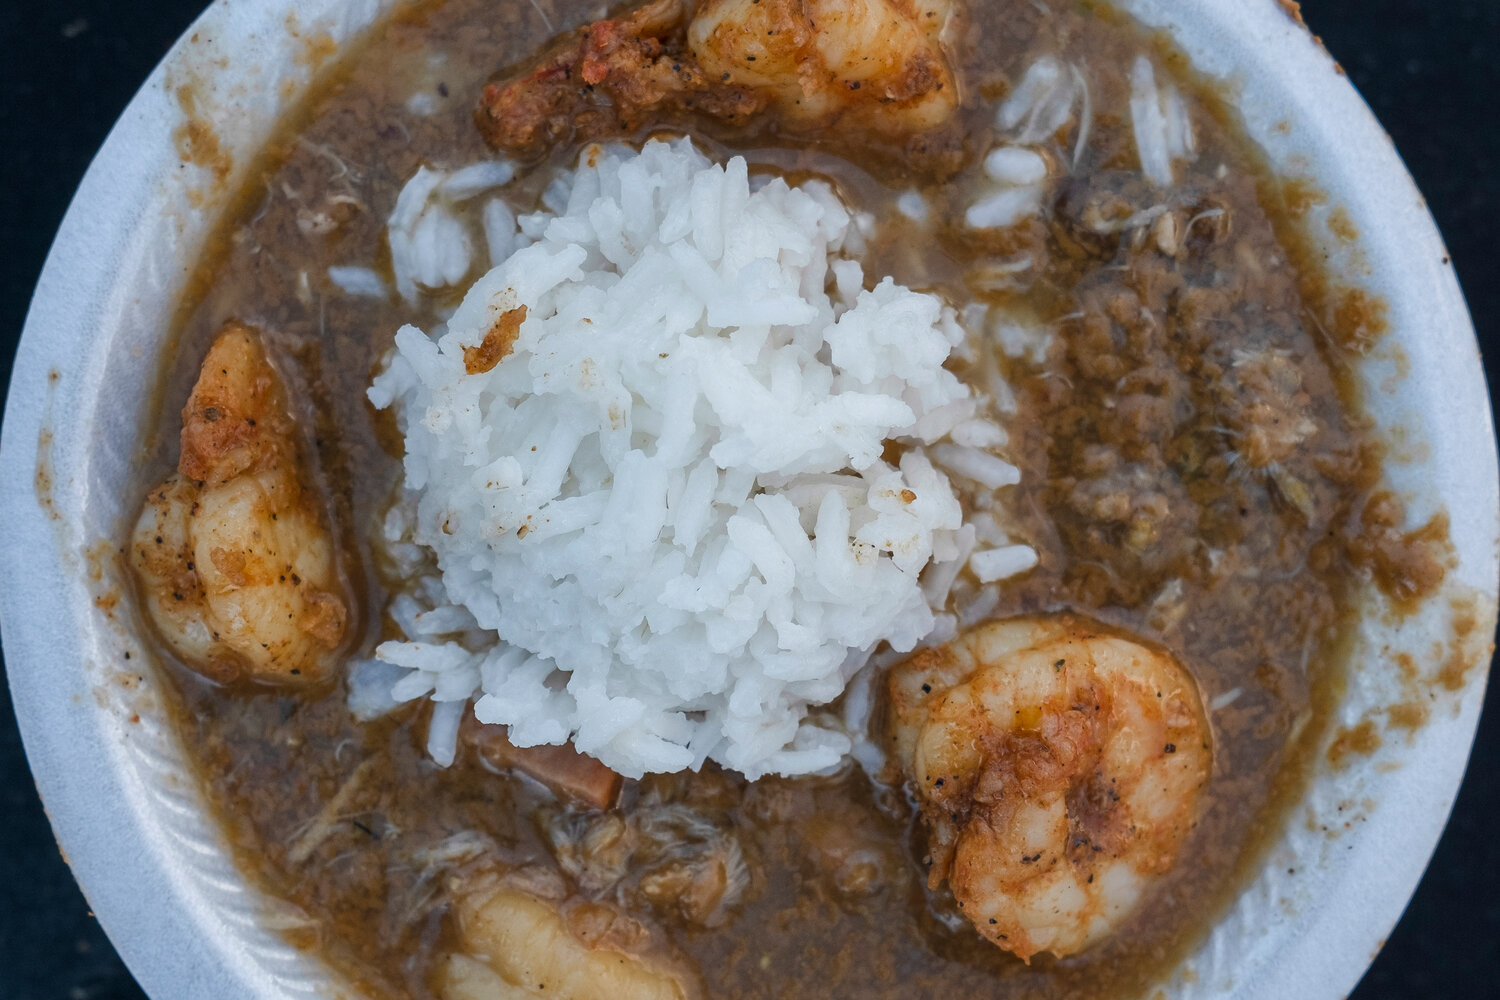 Gumbo from Smokin’ Kettle out of Daphne, Alabama was one of the gumbo choices at the 2023 Gumbo and Alabama Slammer Festival.